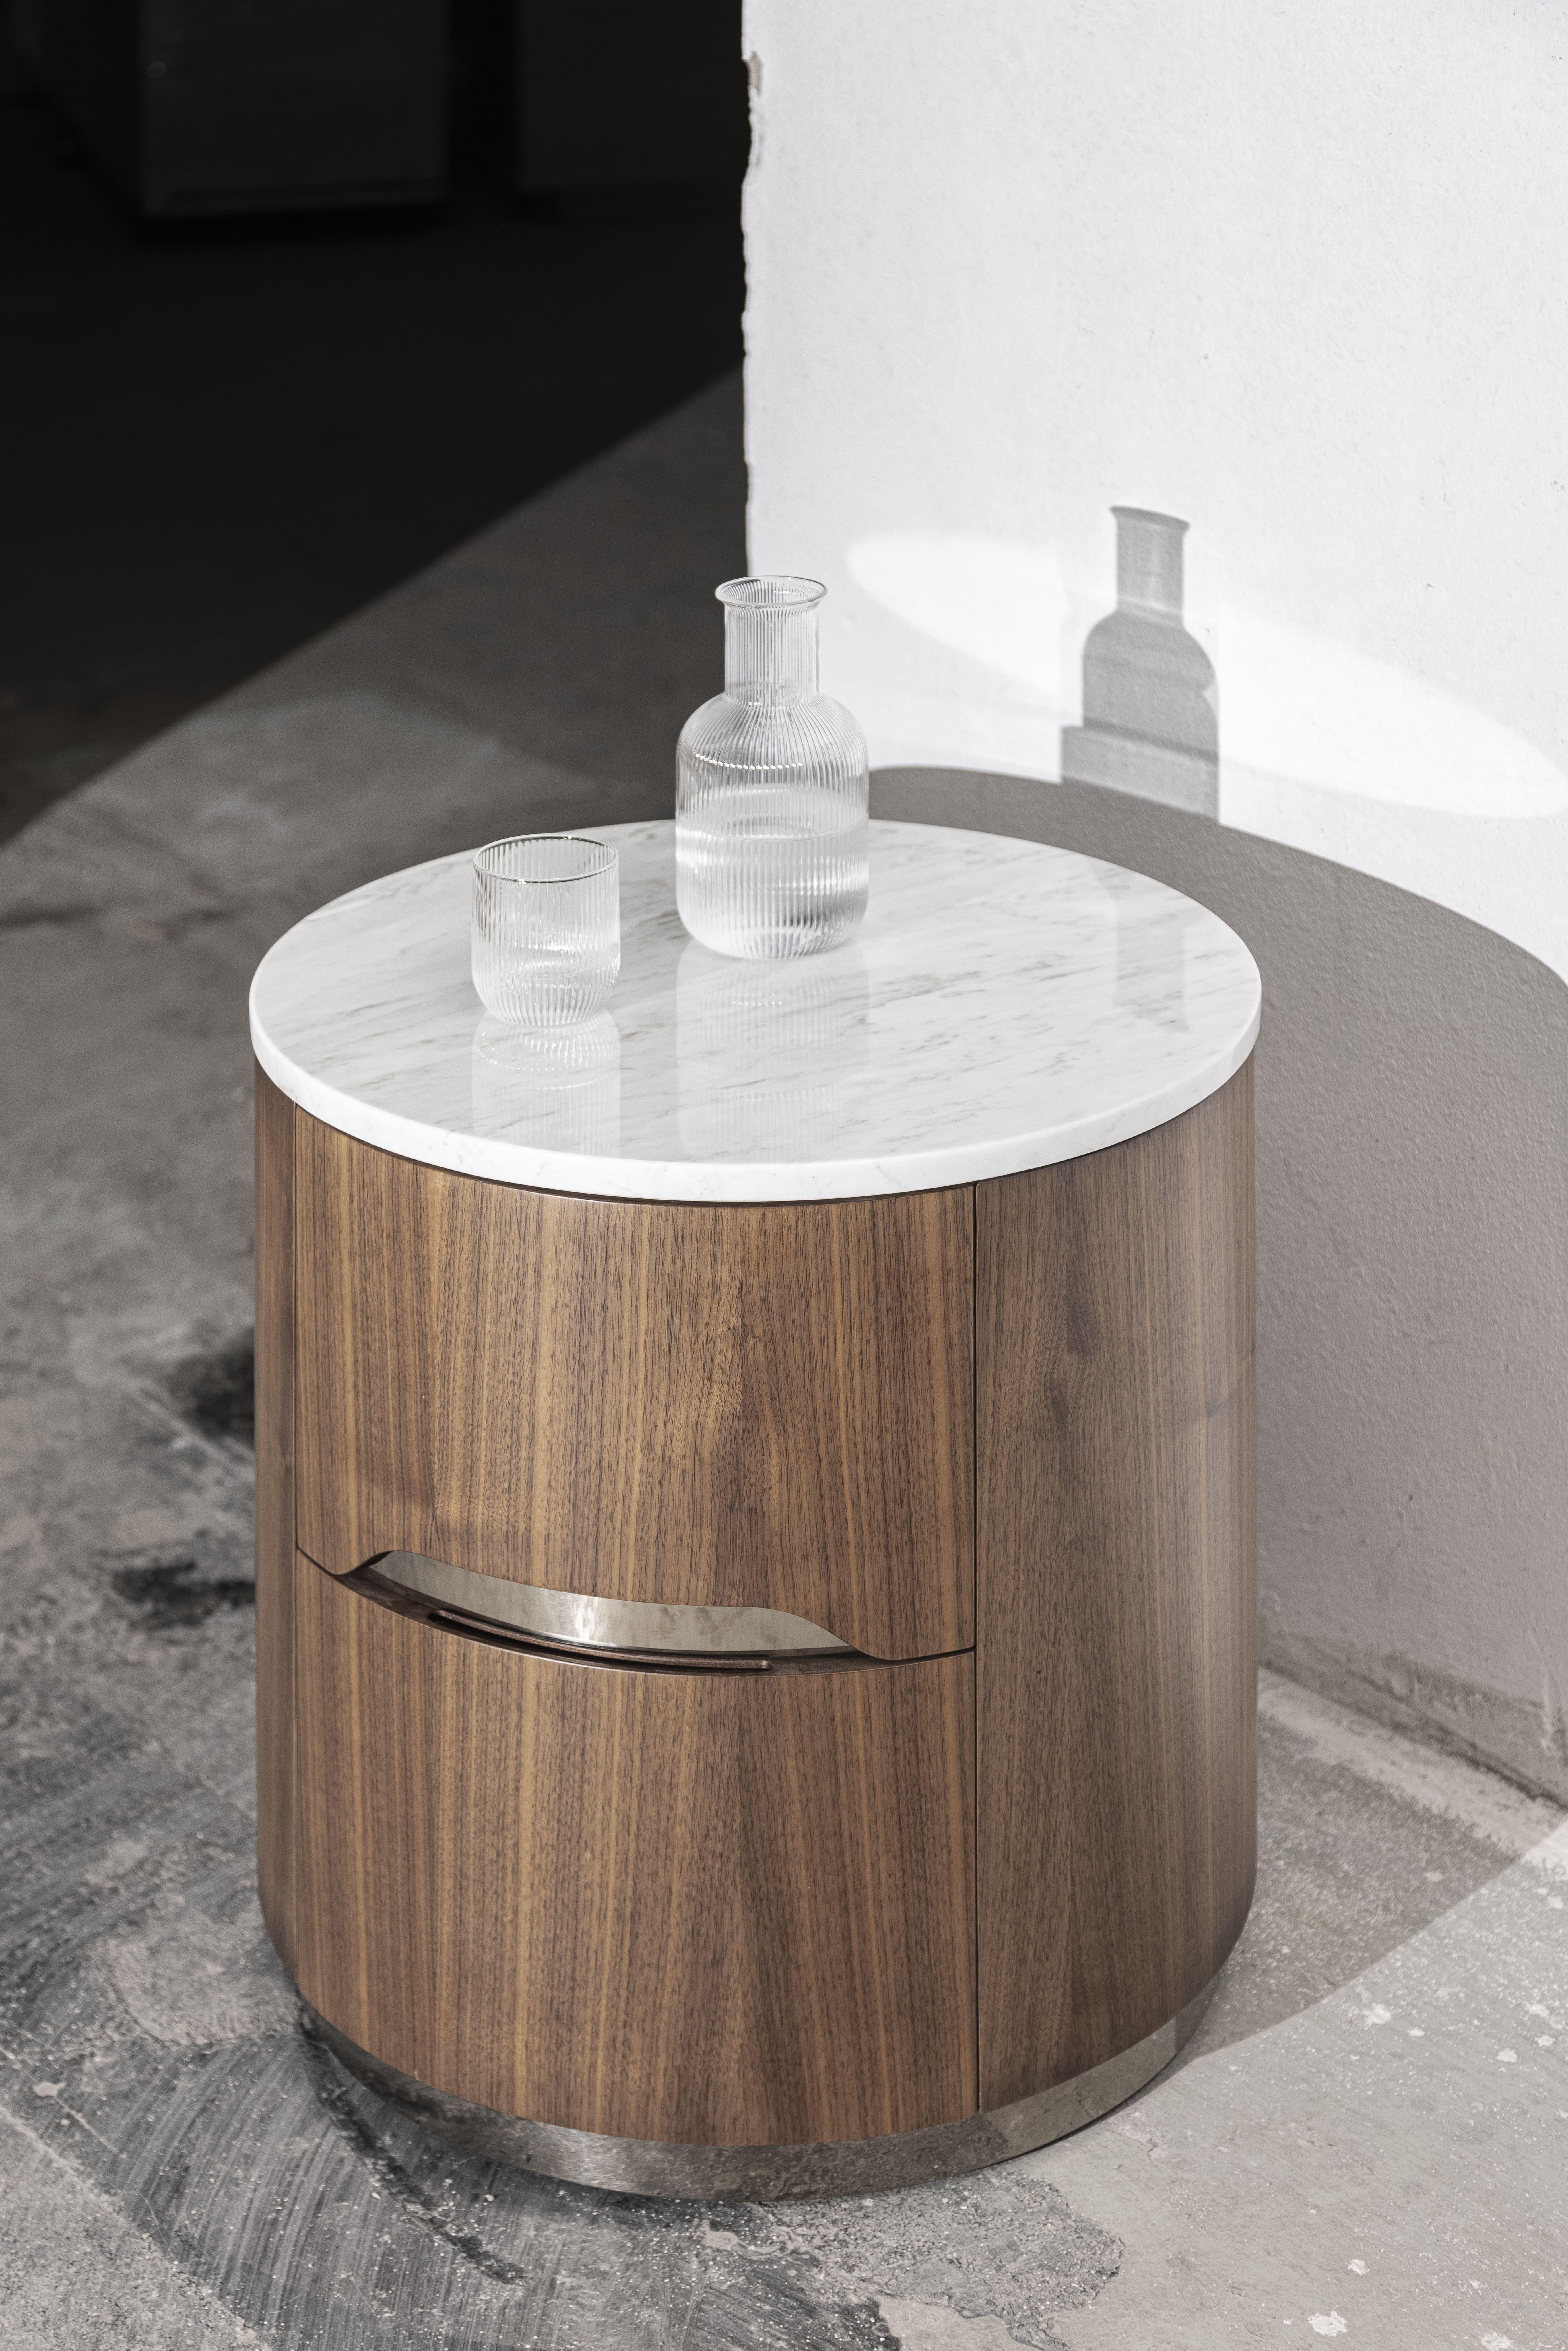 Calling all nocturnal creatures! SMOOTH TALKER is built from walnut veneer, and its cylindrical shape was expertly designed to create a visually appealing silhouette. A marble top spacious to display all bedside essentials, but discrete enough to